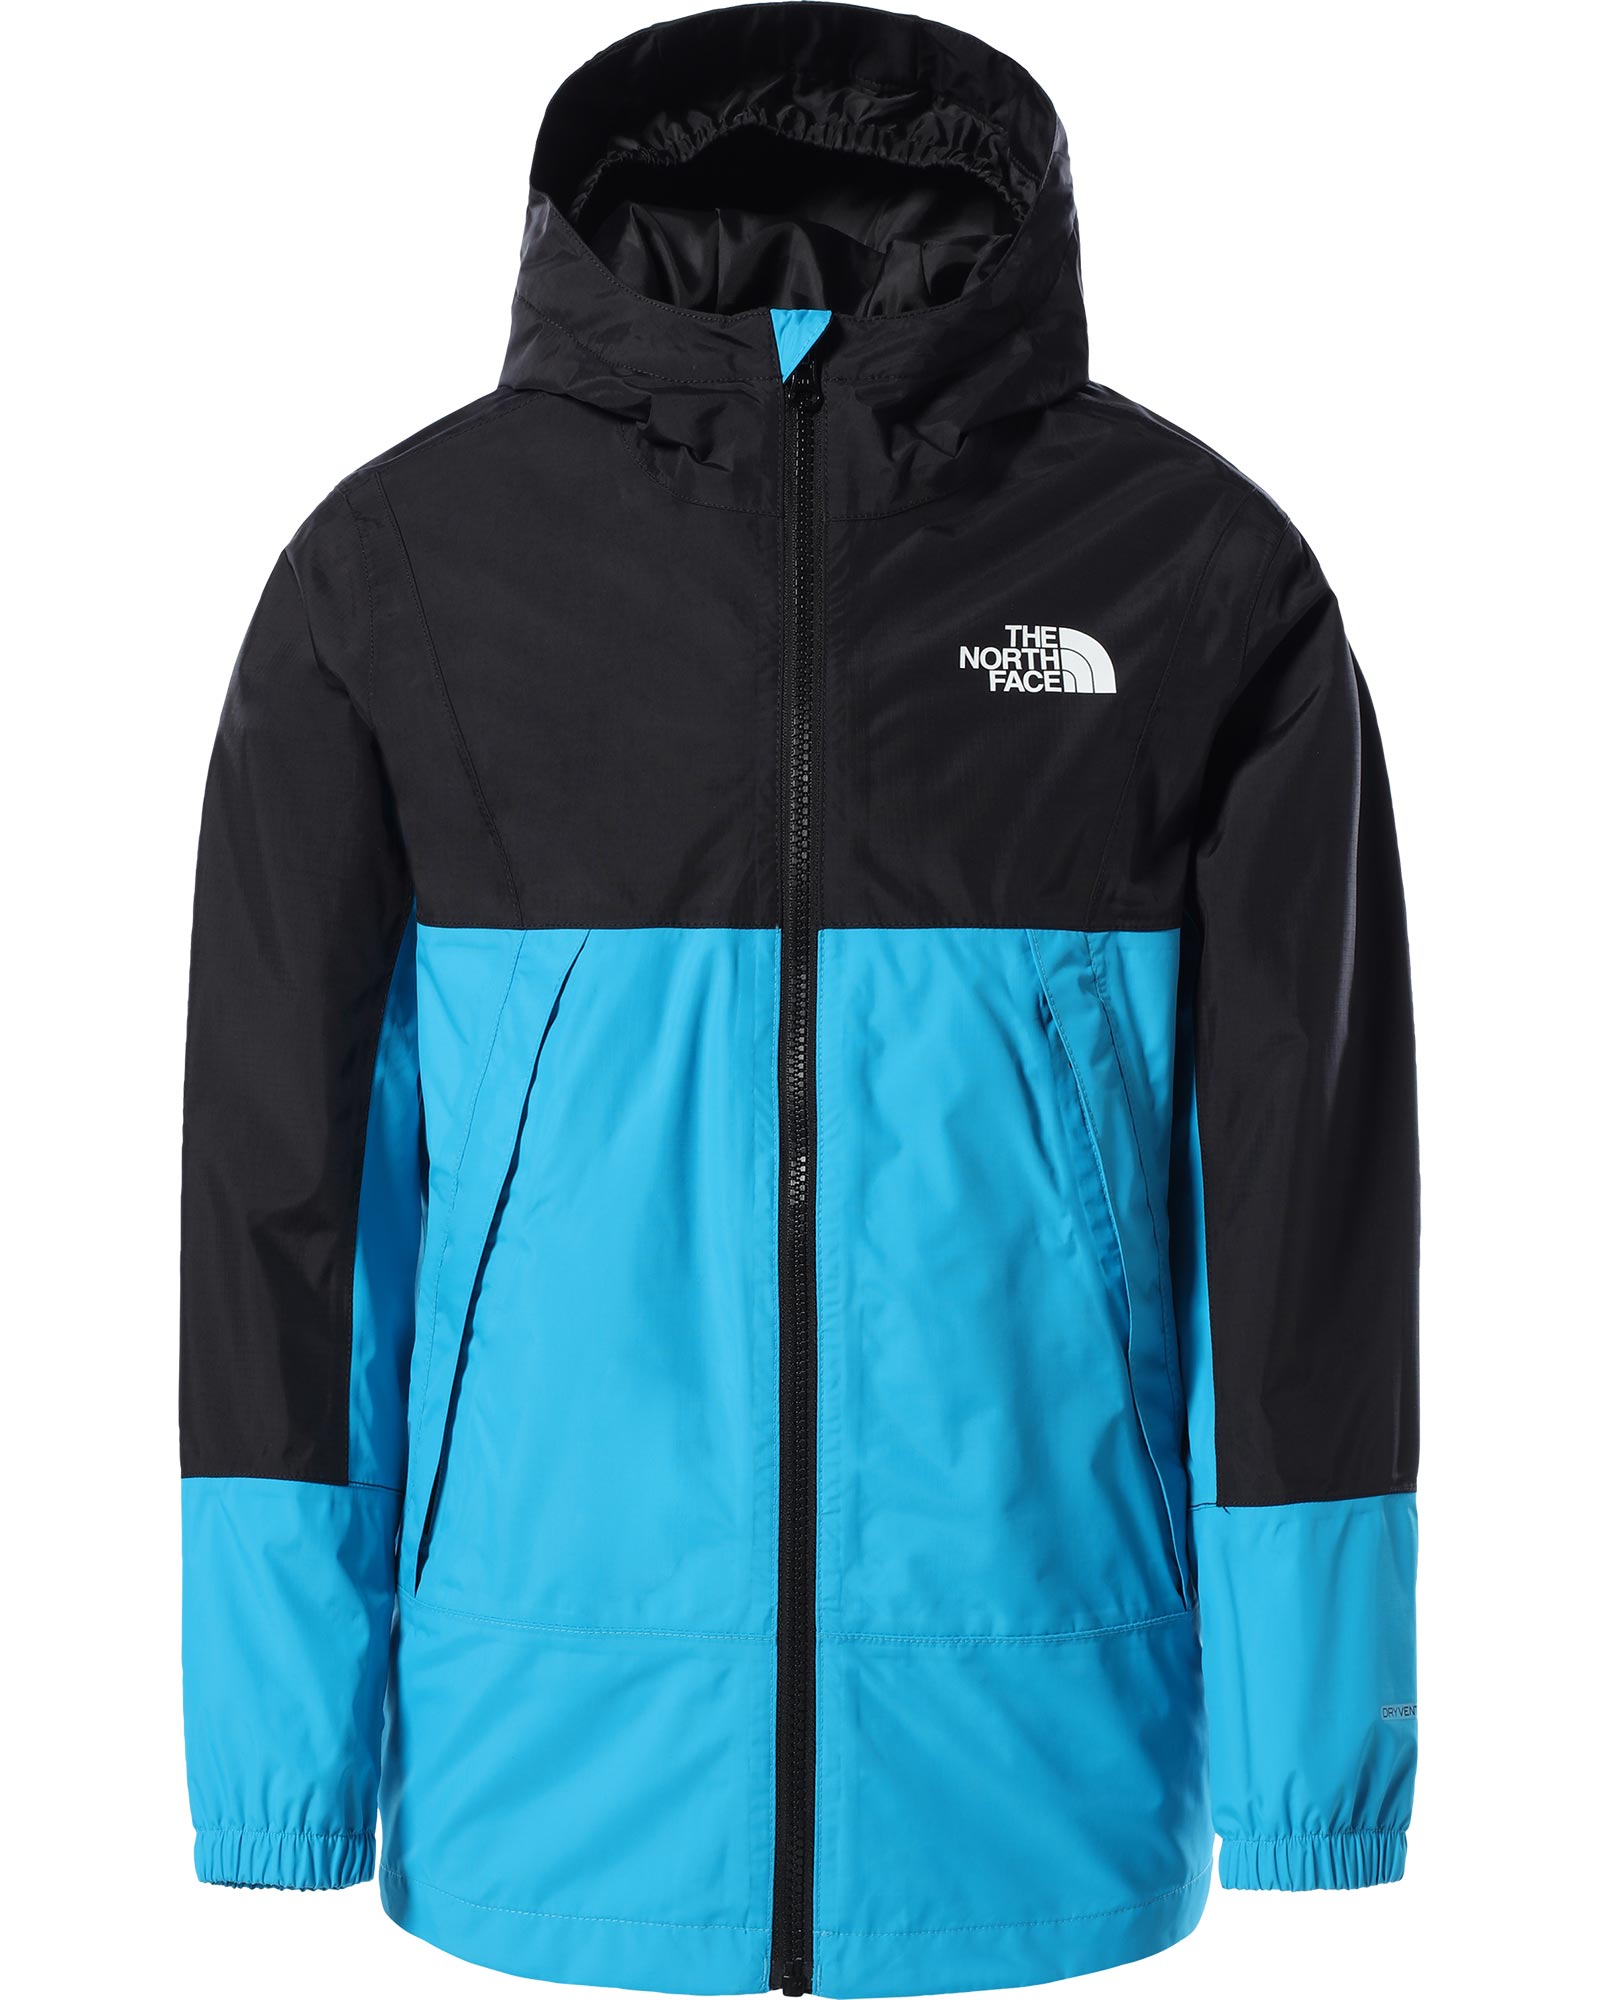 The North Face Youth Lobuche Dryvent Jacket